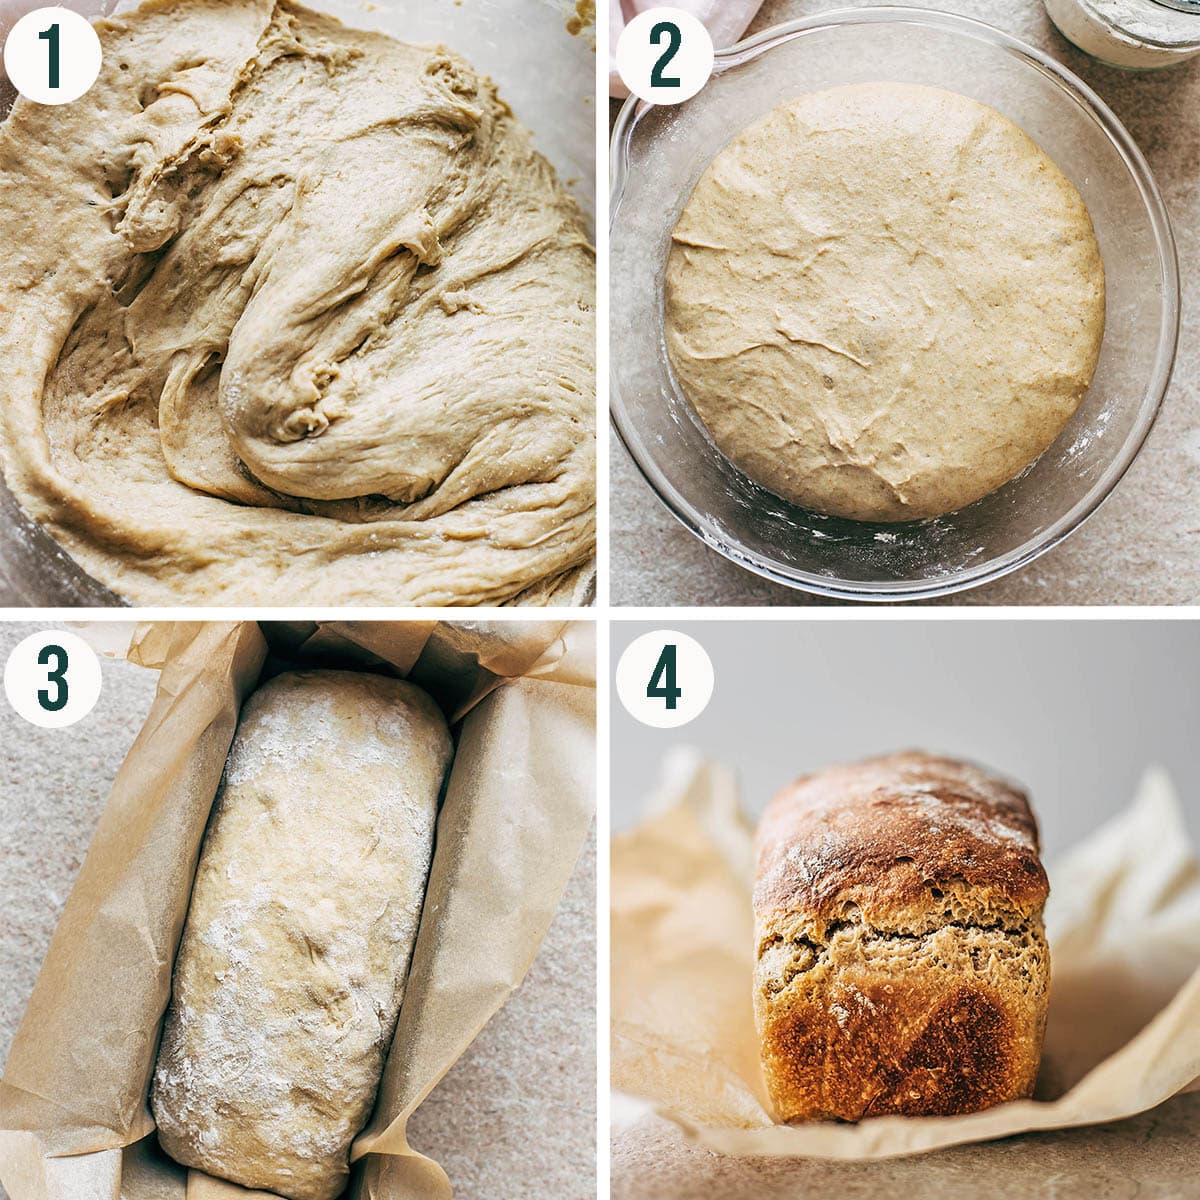 Sourdough loaf bread steps 1 to 4, mixed dough, after rising, before baking, and after baking.